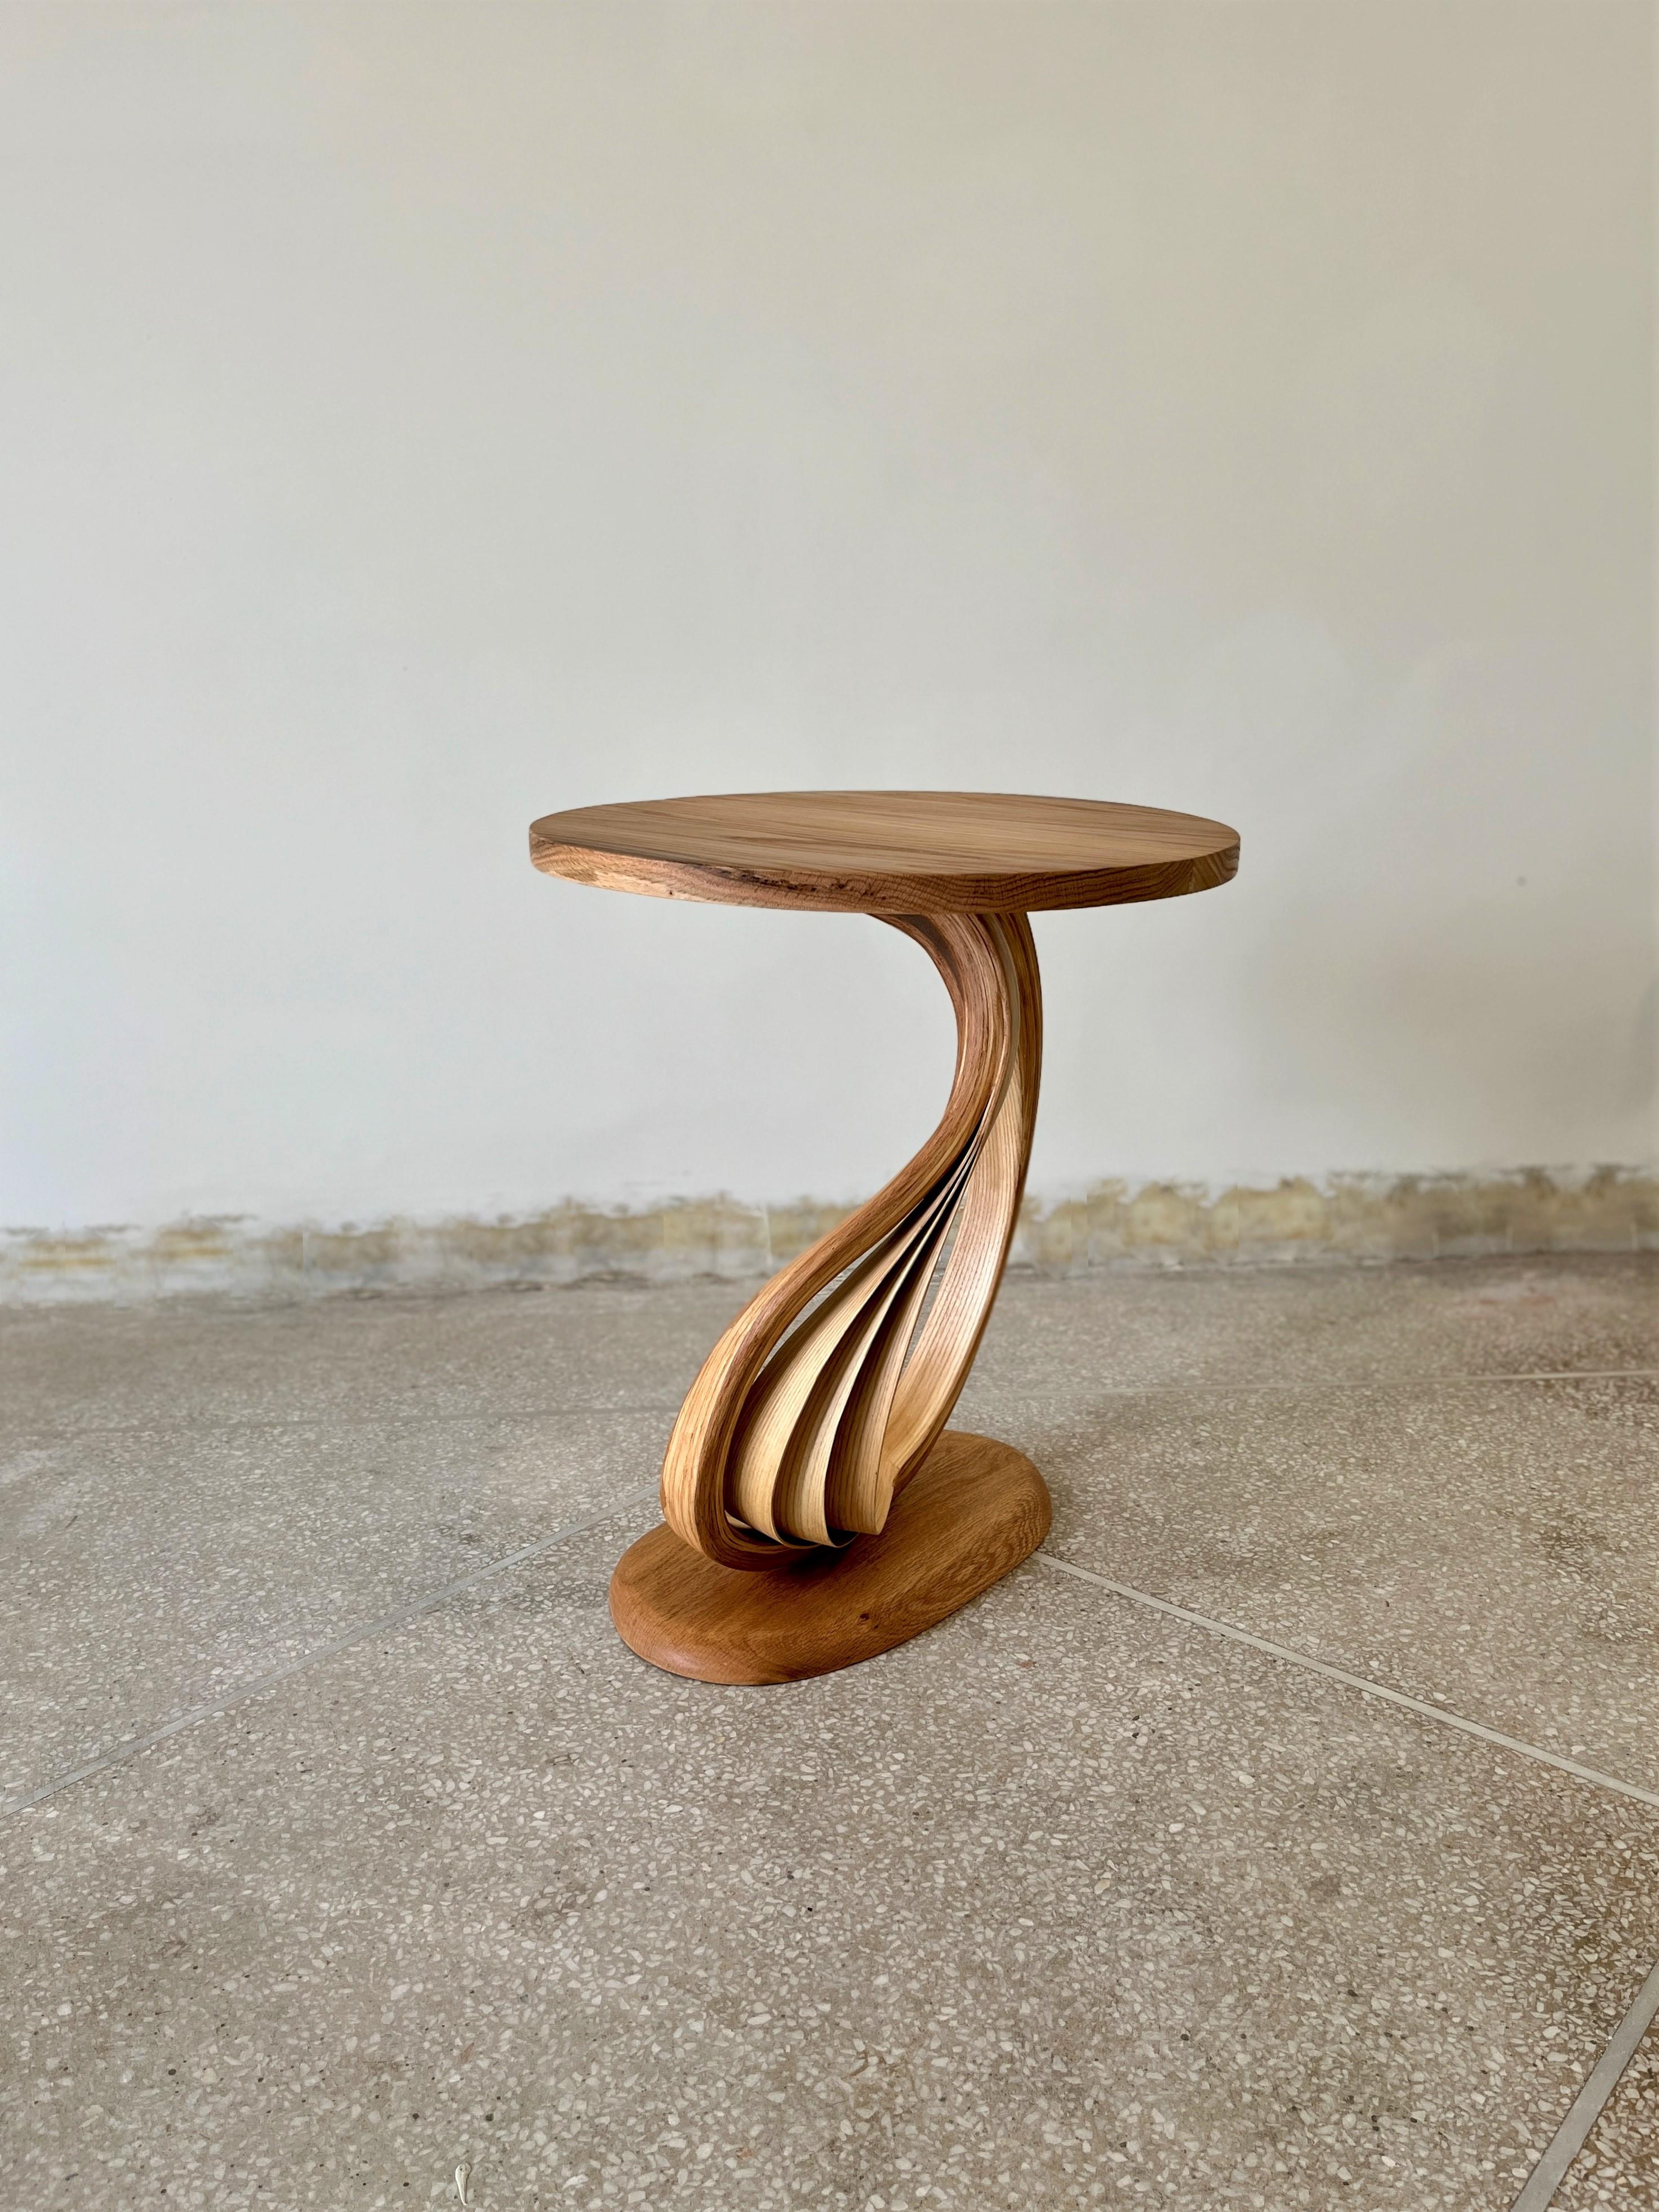 Pars Side Tabel is a bent wood design made by Raka Studio.

This piece's main element is bentwood's organic motion between the top and the base. The proportions of the top and the base are made to enhance the centre design of the piece. The piece